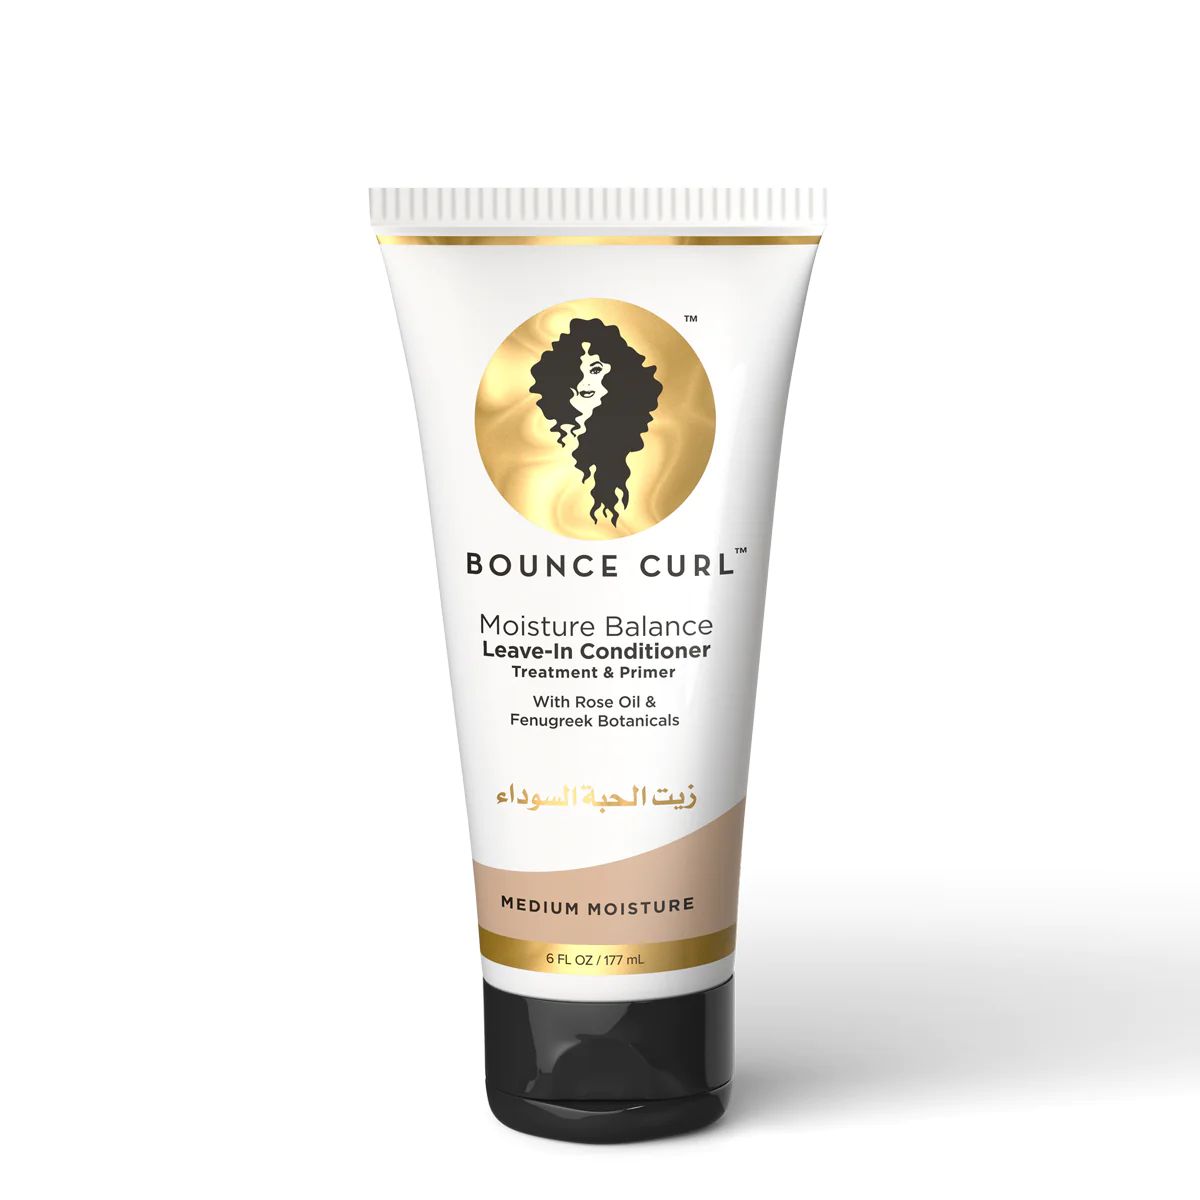 Moisture Balance Leave-In Conditioner | Bounce Curl